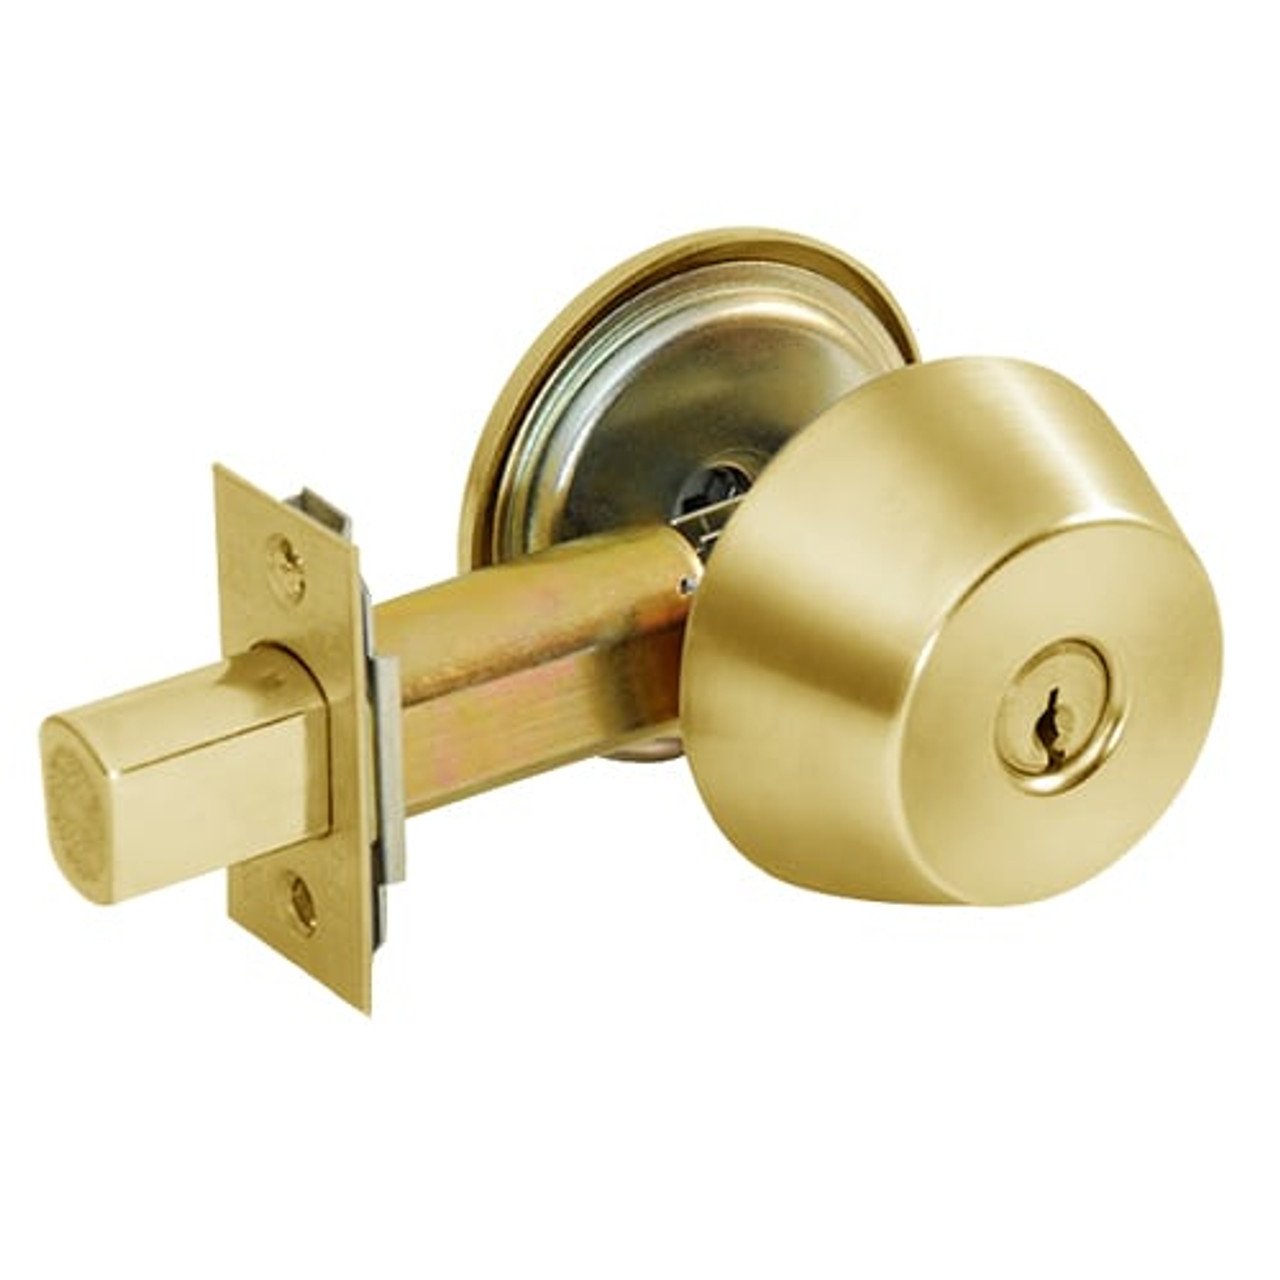 DL3211-605 Corbin DL3200 Series Cylindrical Deadlocks with Single Cylinder w/ Blank Plate in Bright Brass Finish